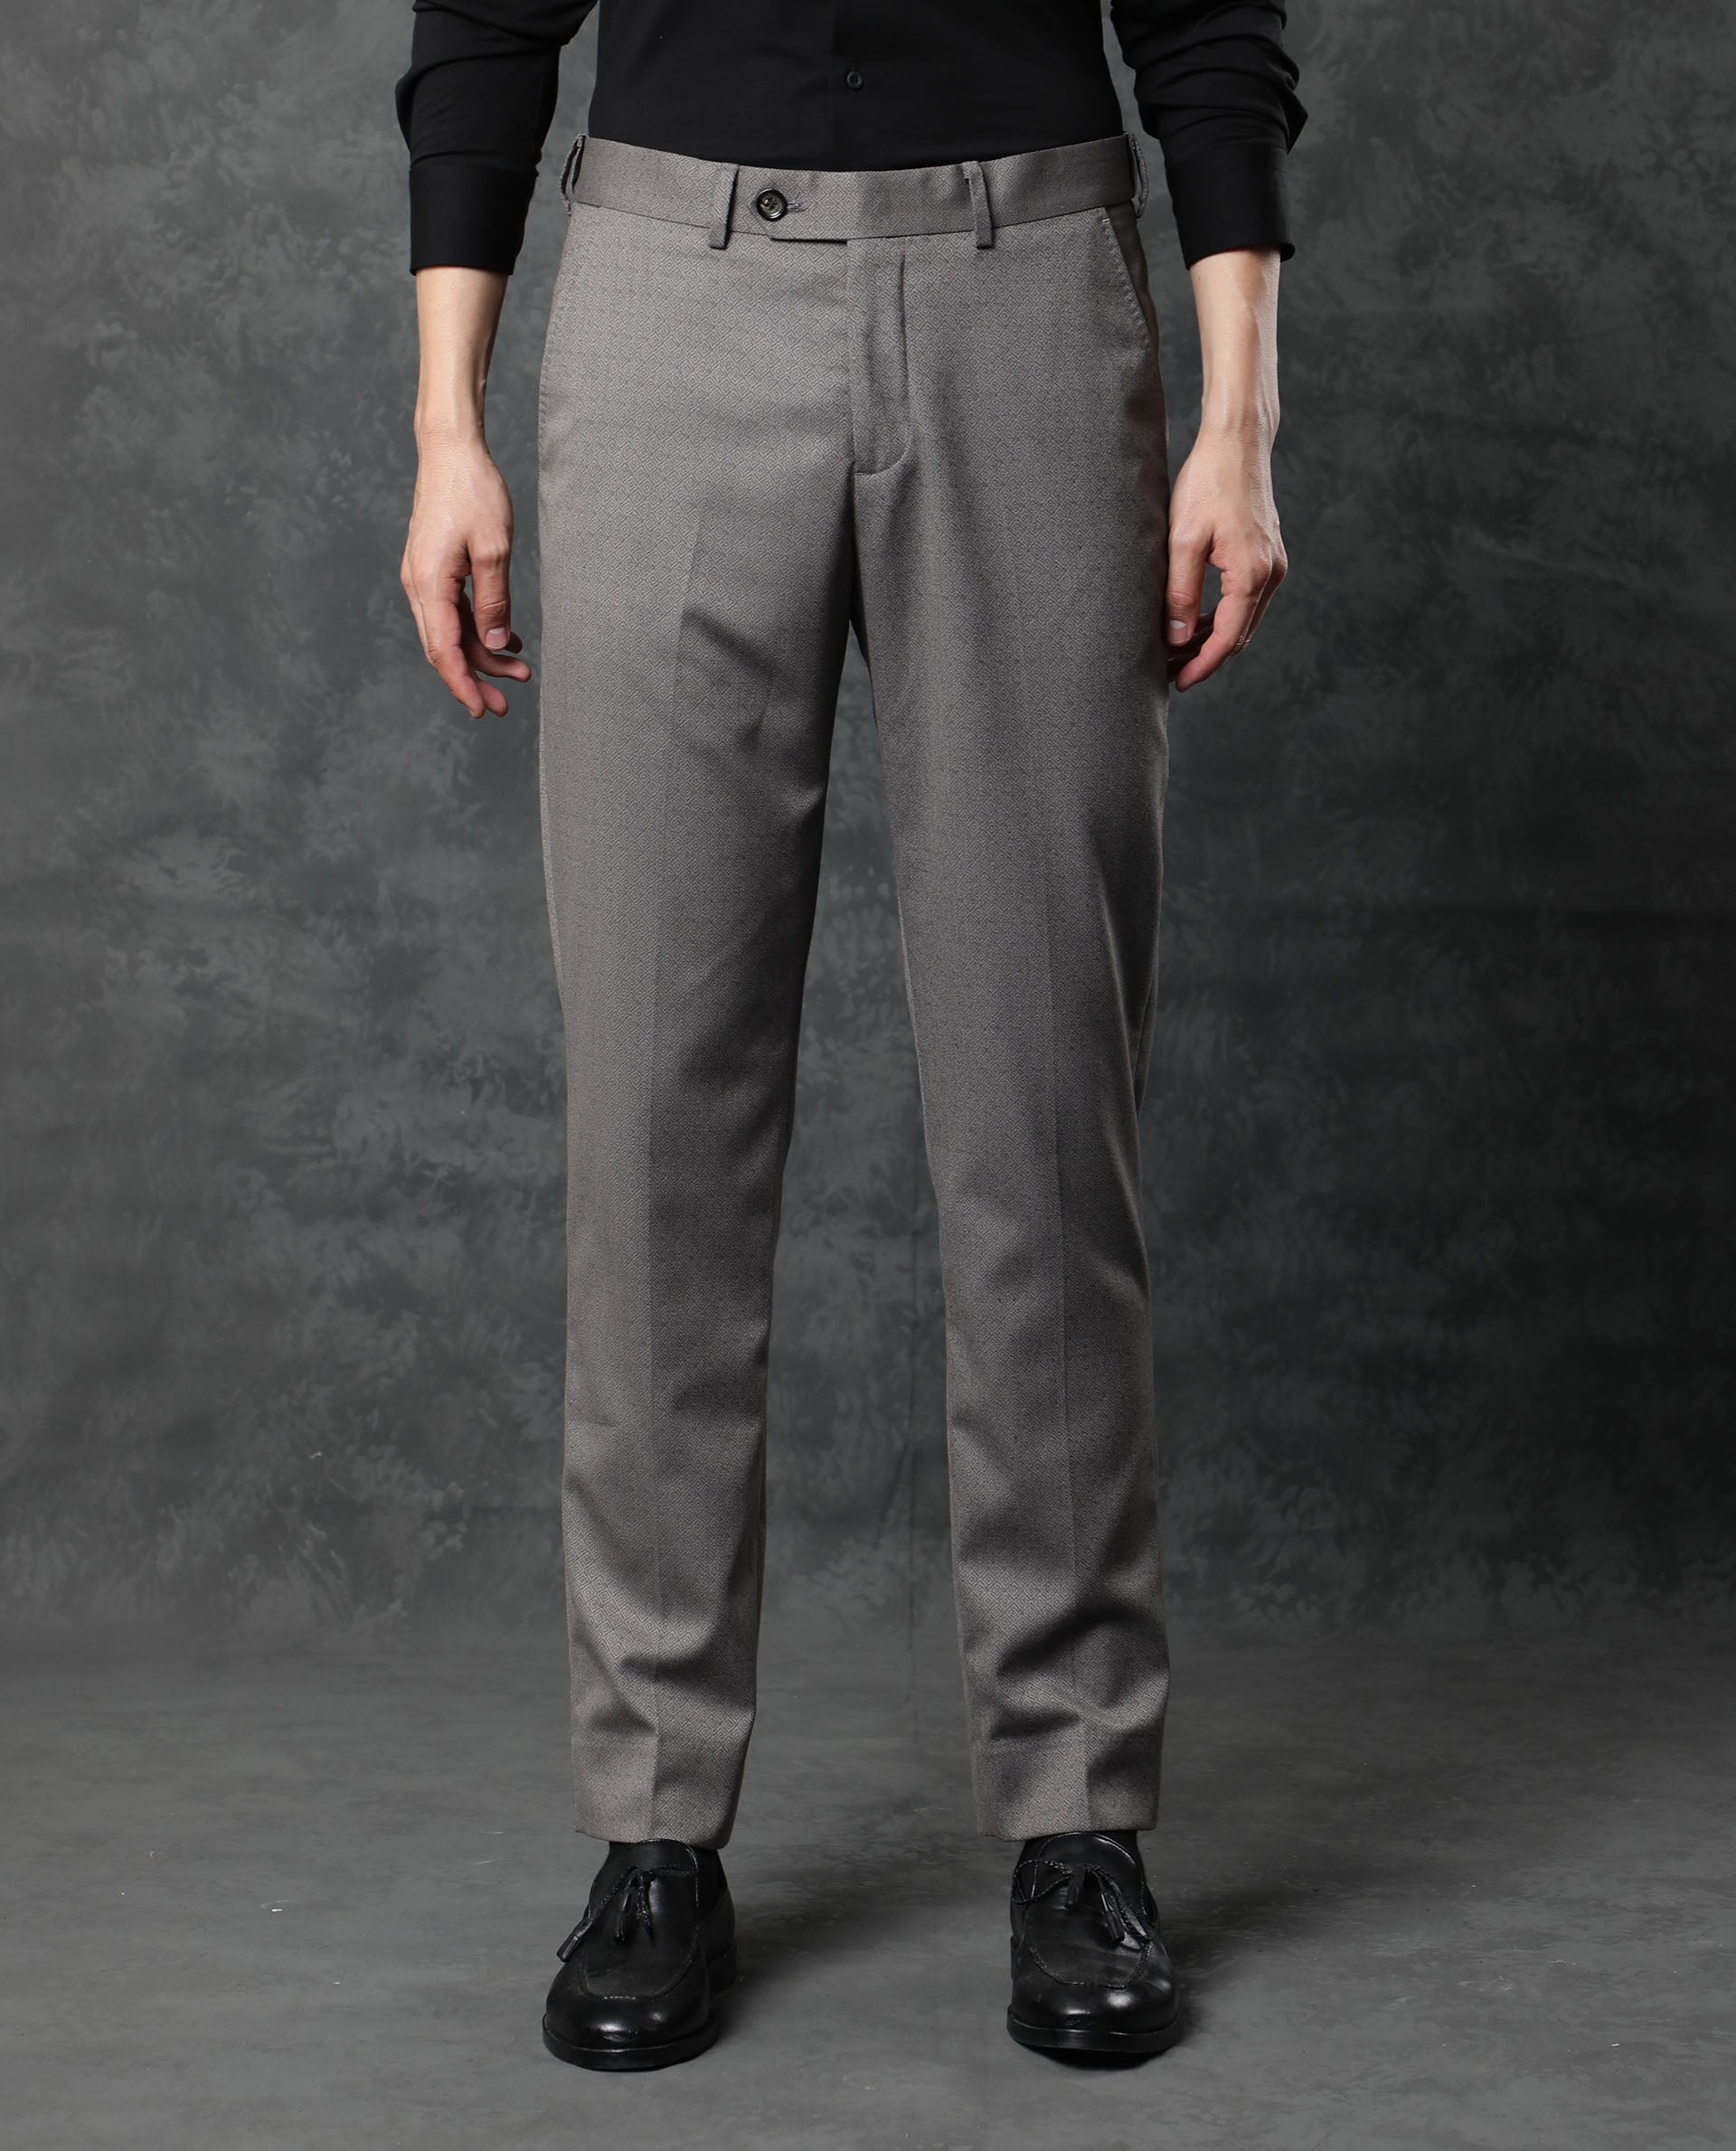 65 POLYESTER 35 VISCOSE Flat Trousers Men Shadow Grey Slim Fit Trouser